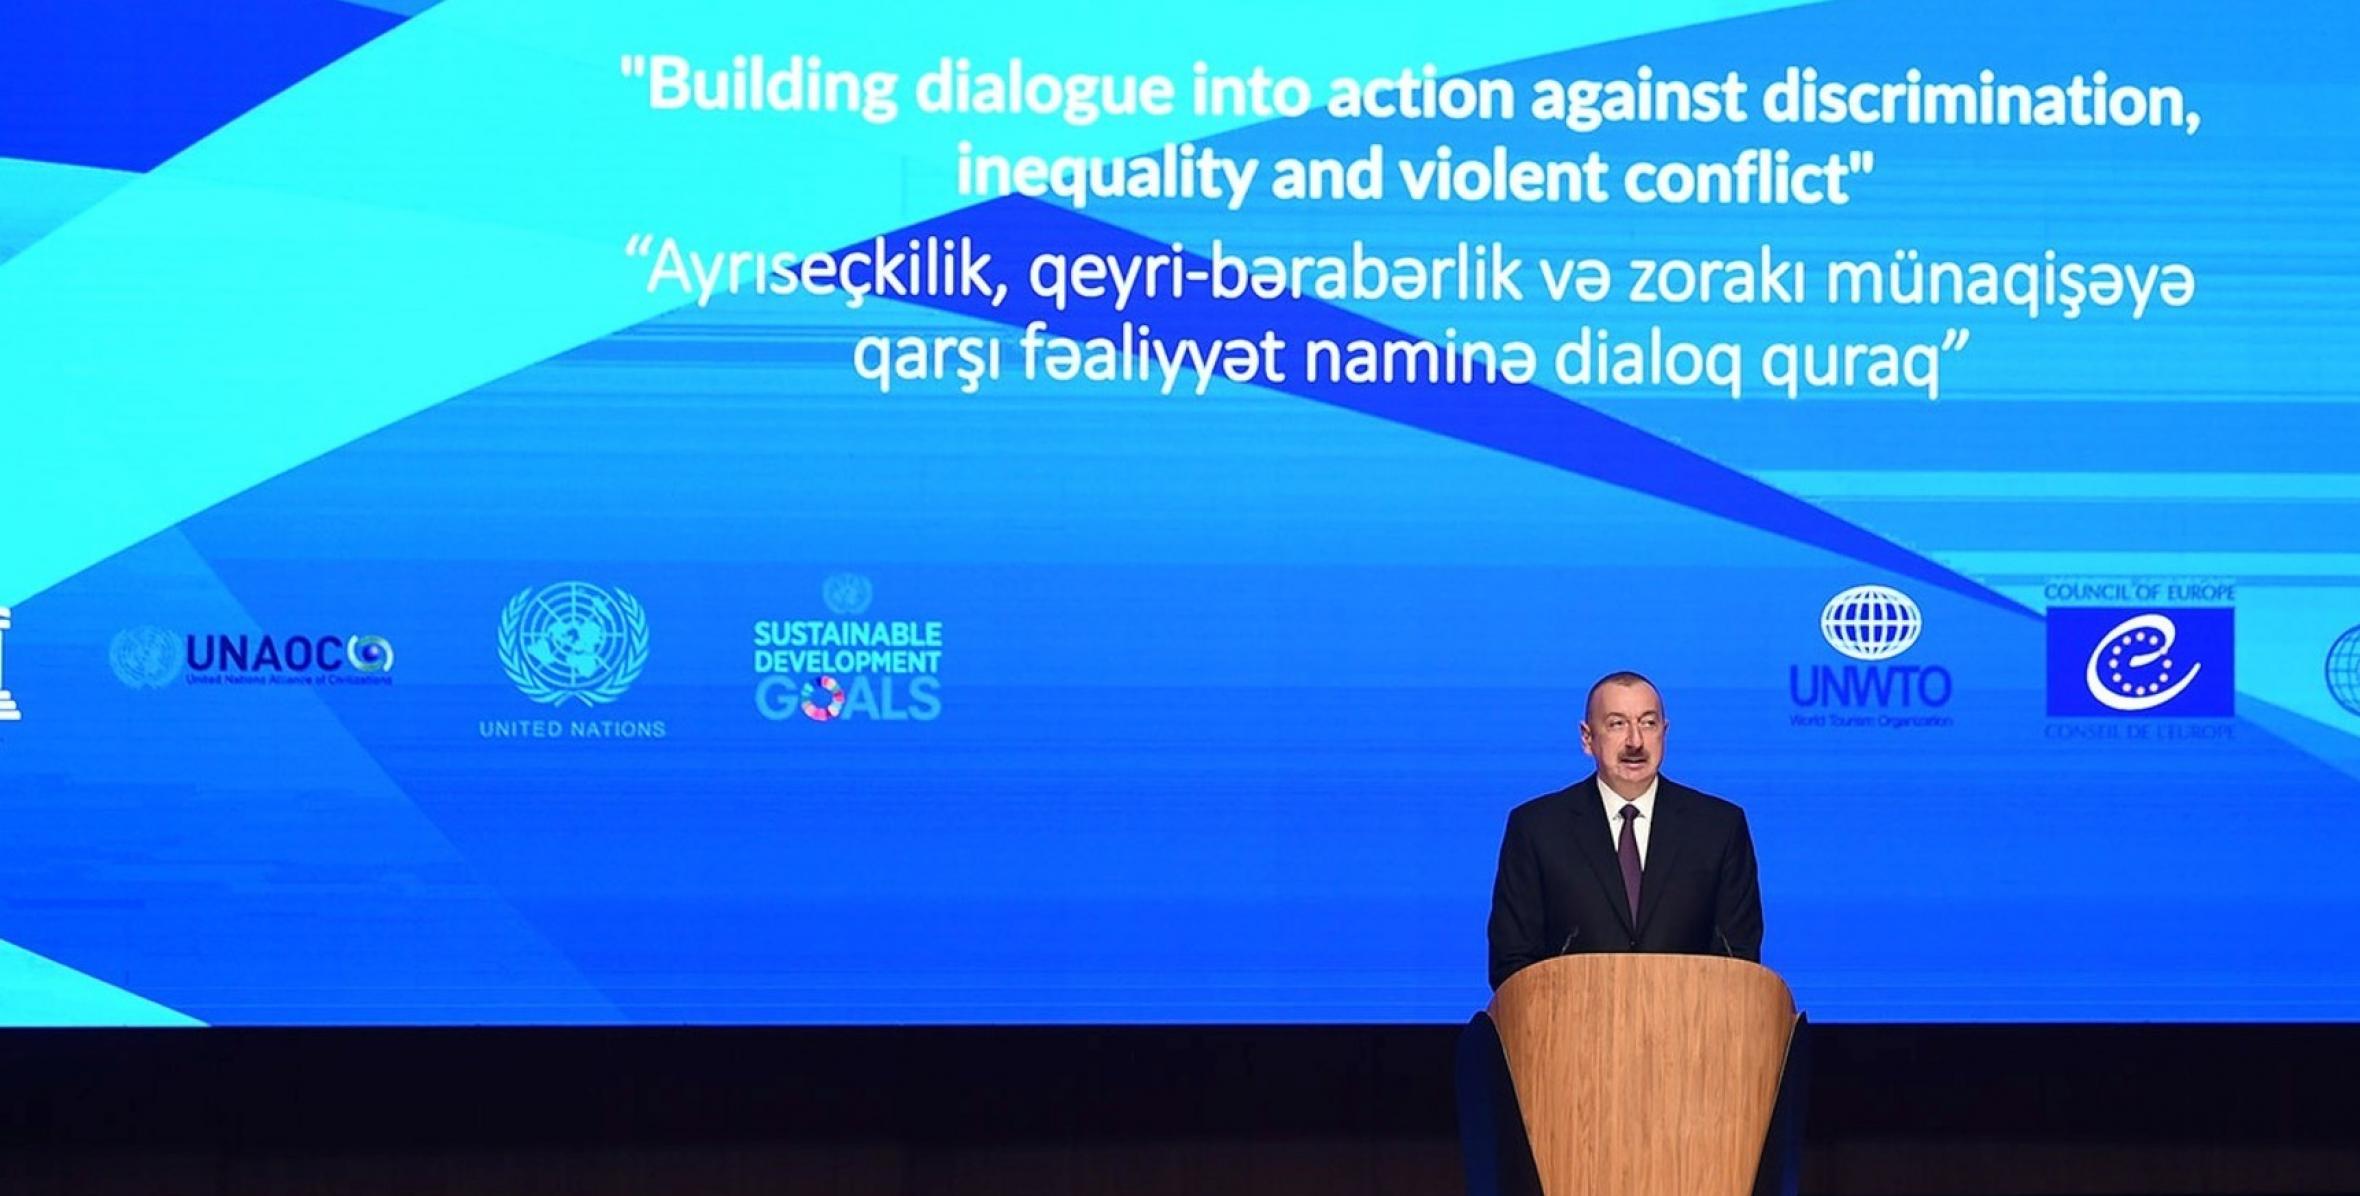 Speech by Ilham Aliyev at the opening of 5th World Forum on Intercultural Dialogue